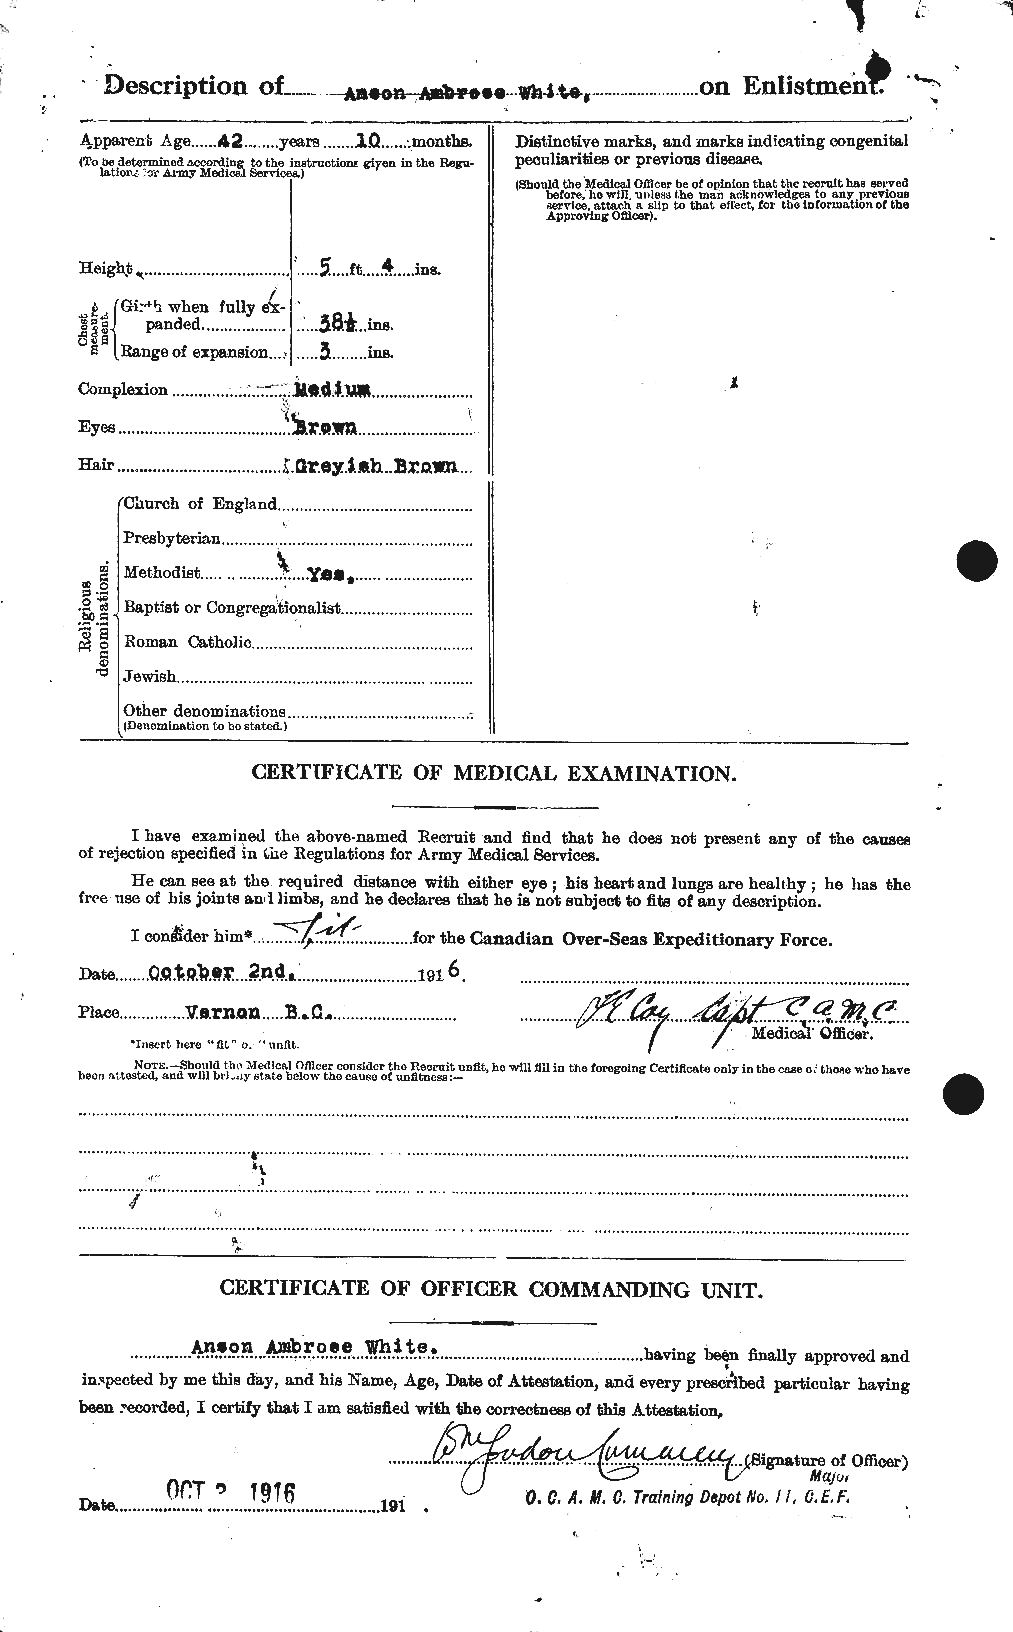 Personnel Records of the First World War - CEF 669811b